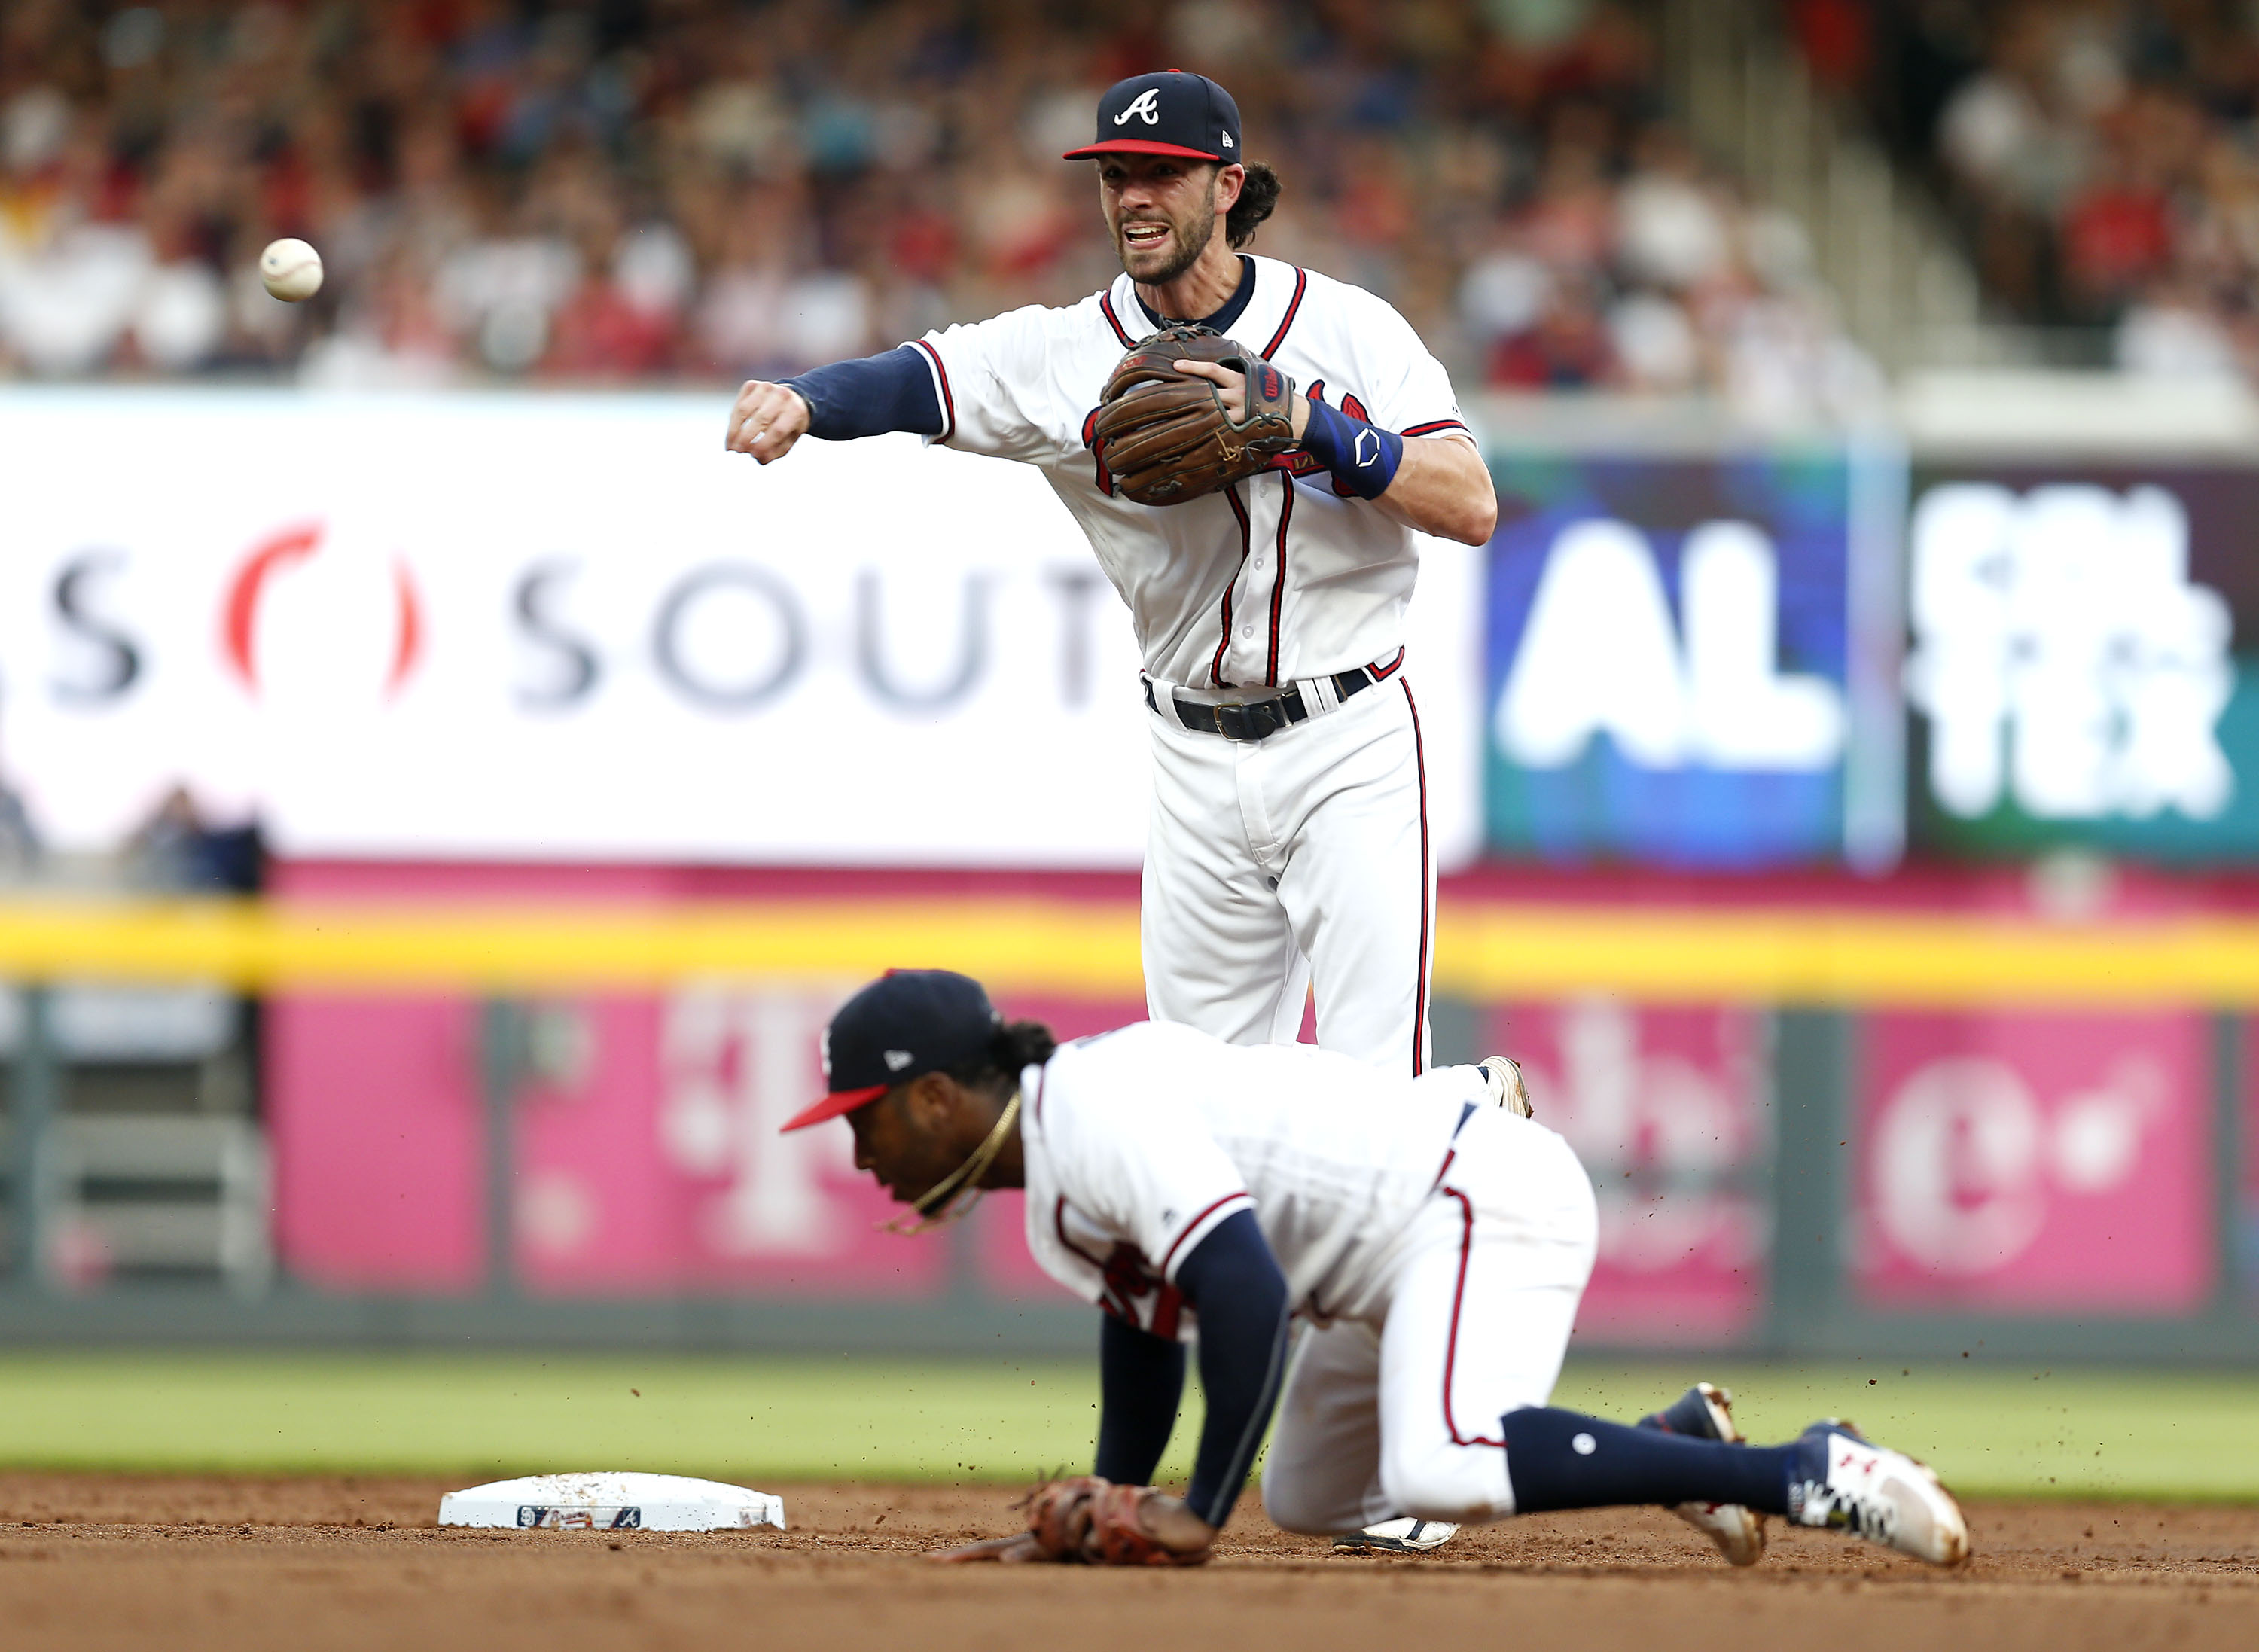 Braves quotes after Friday night loss to Padres